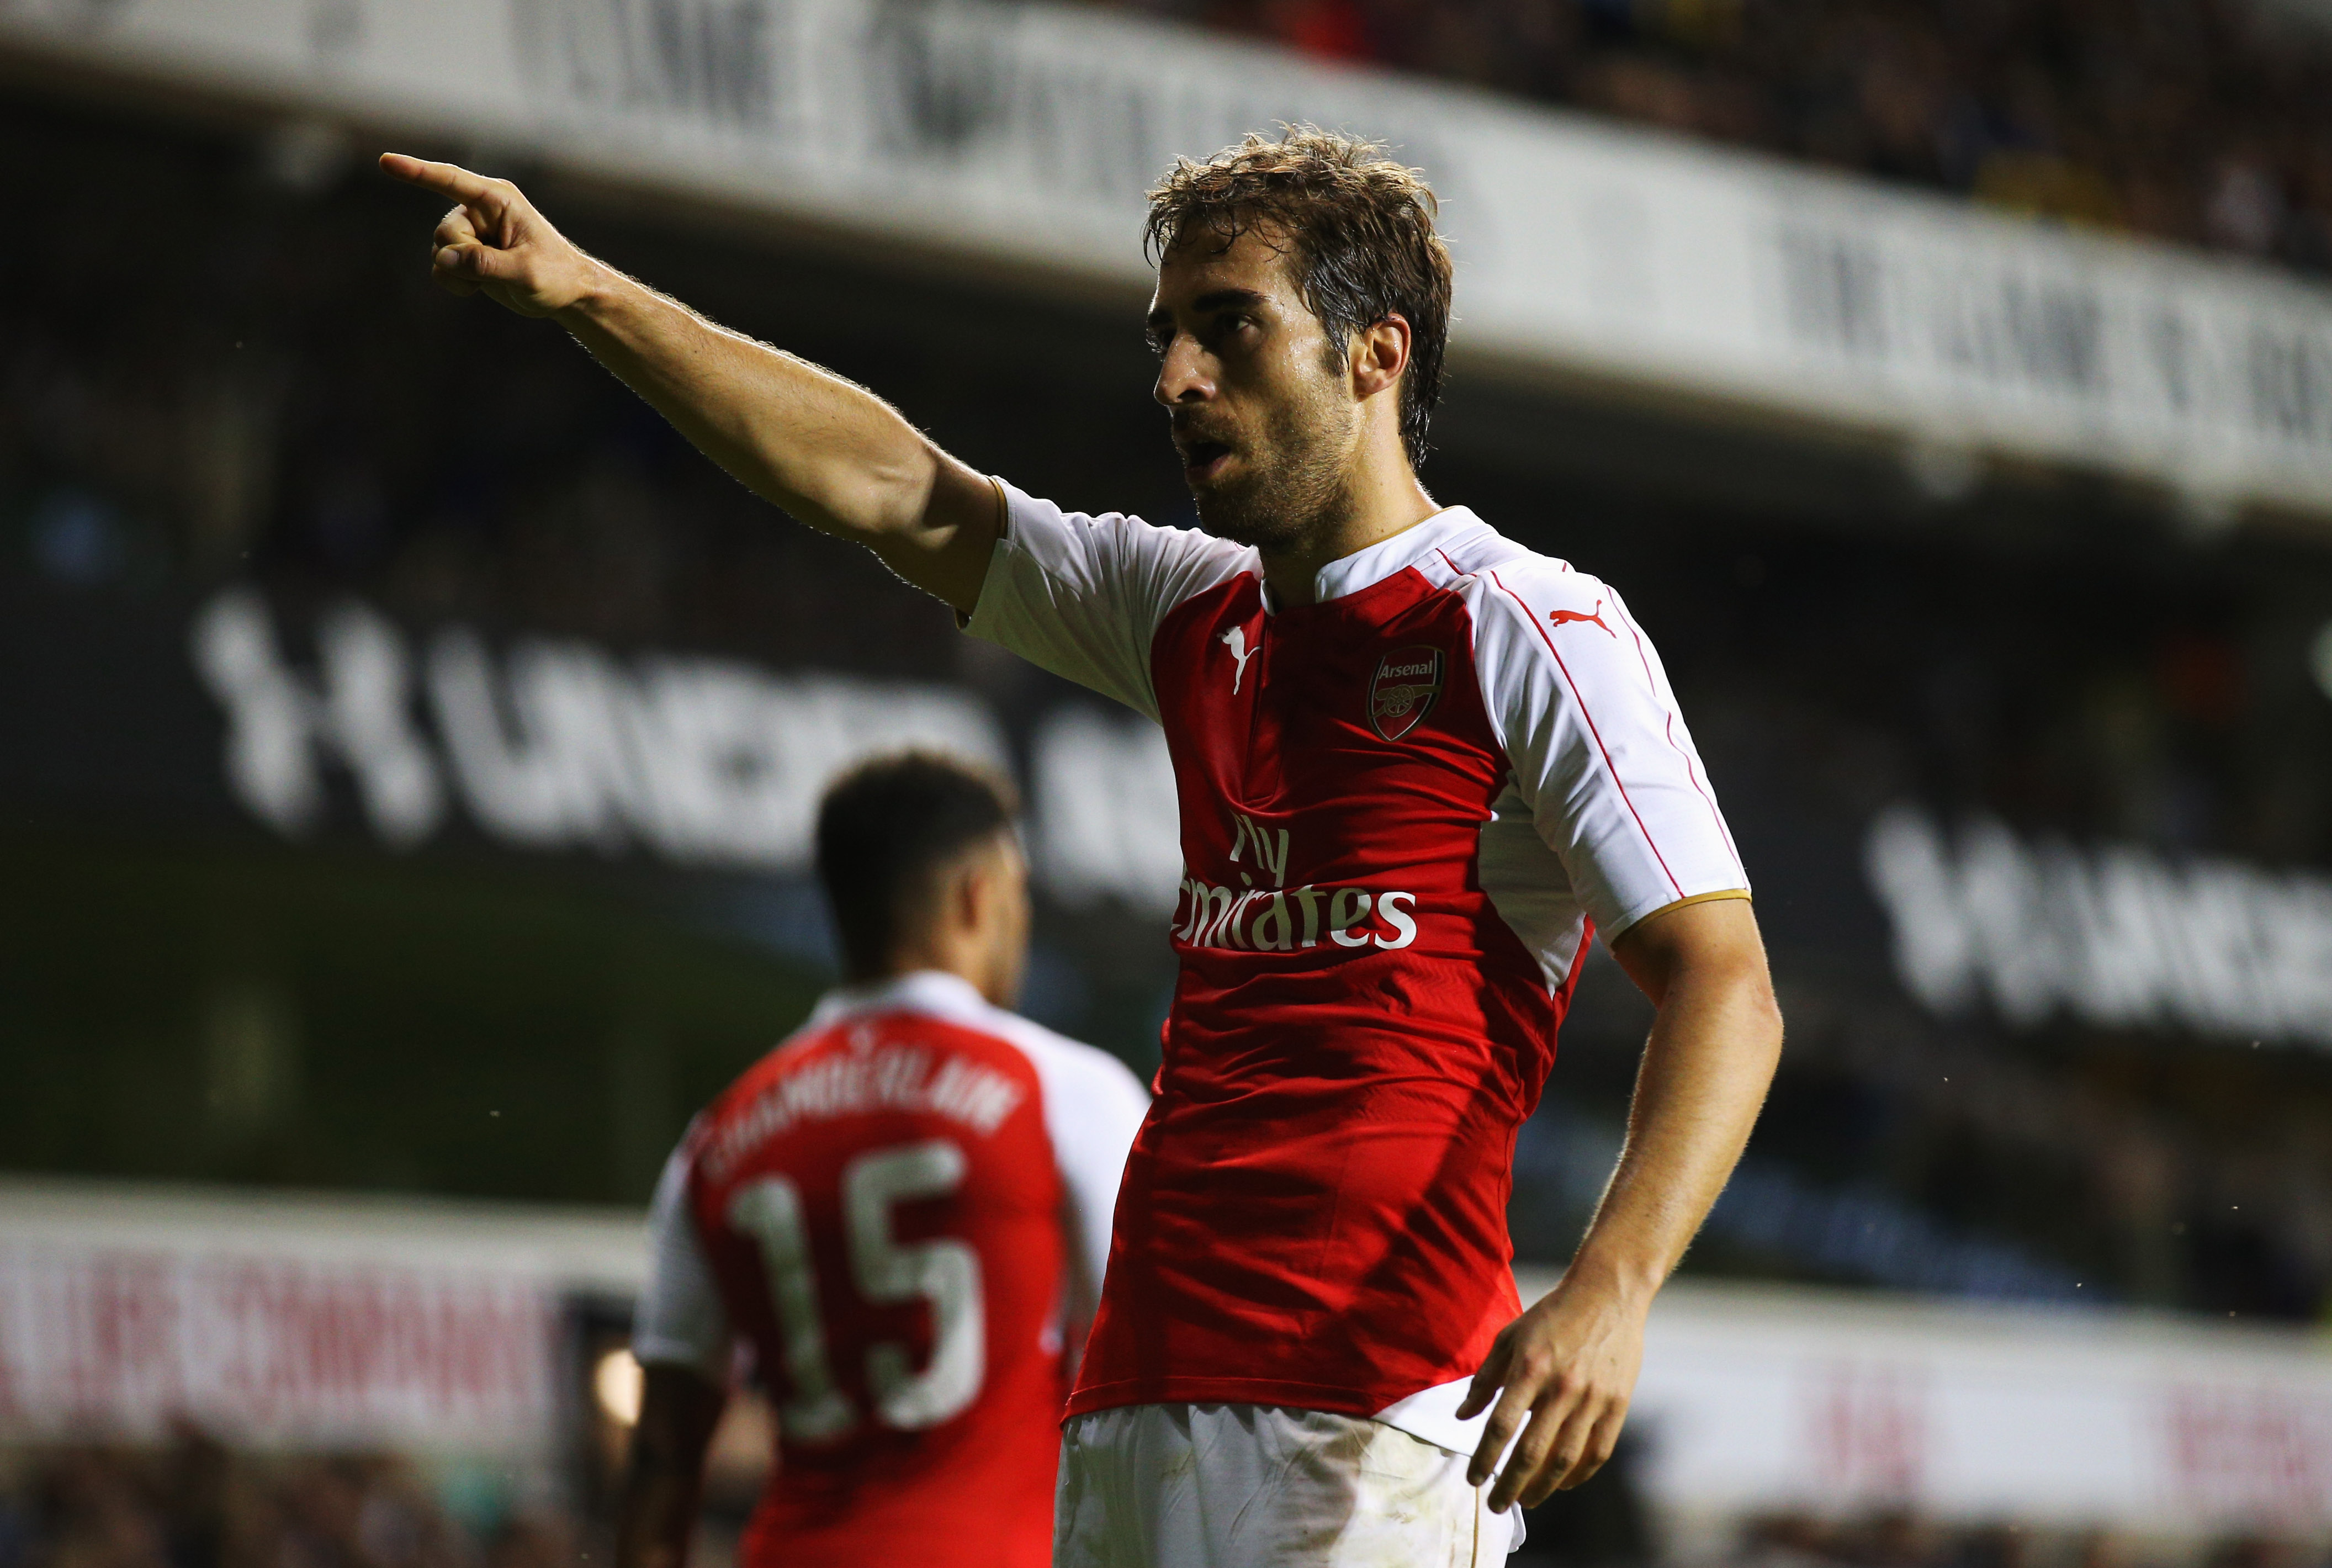 LONDON, ENGLAND - SEPTEMBER 23:  Mathieu Flamini of Arsenal celebrates as he scores their second goal during the Capital One Cup third round match between Tottenham Hotspur and Arsenal at White Hart Lane on September 23, 2015 in London, England.  (Photo by Ian Walton/Getty Images)